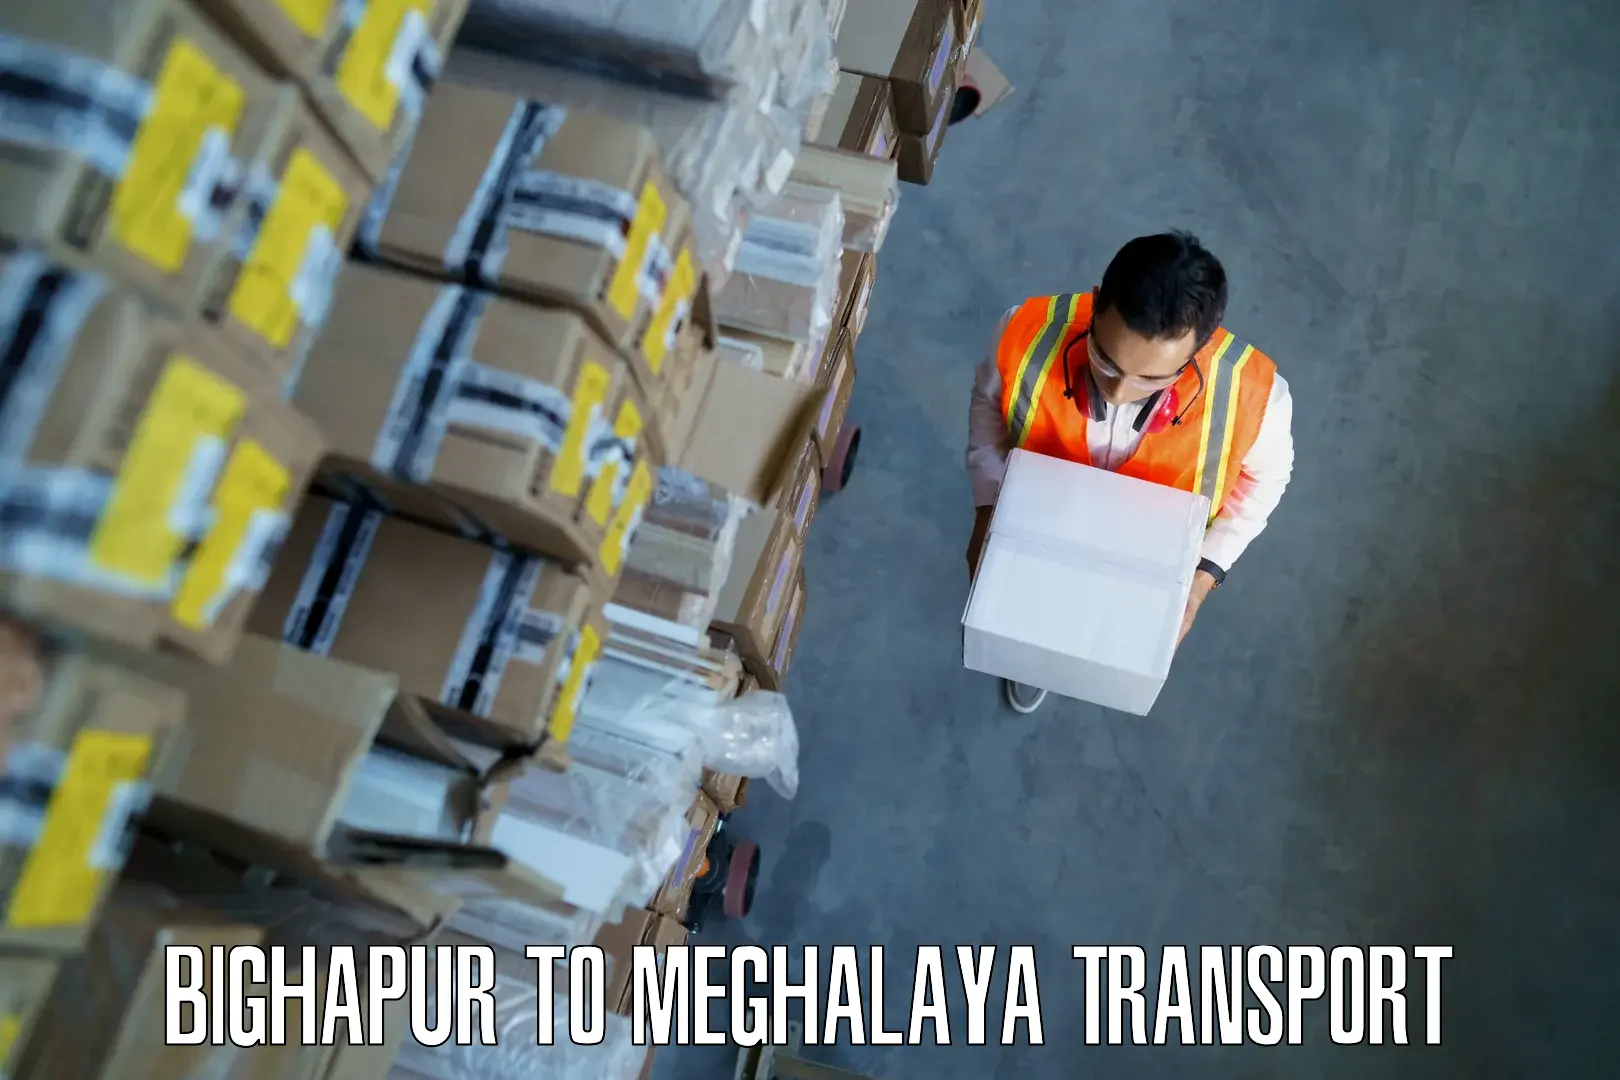 Commercial transport service Bighapur to Shillong